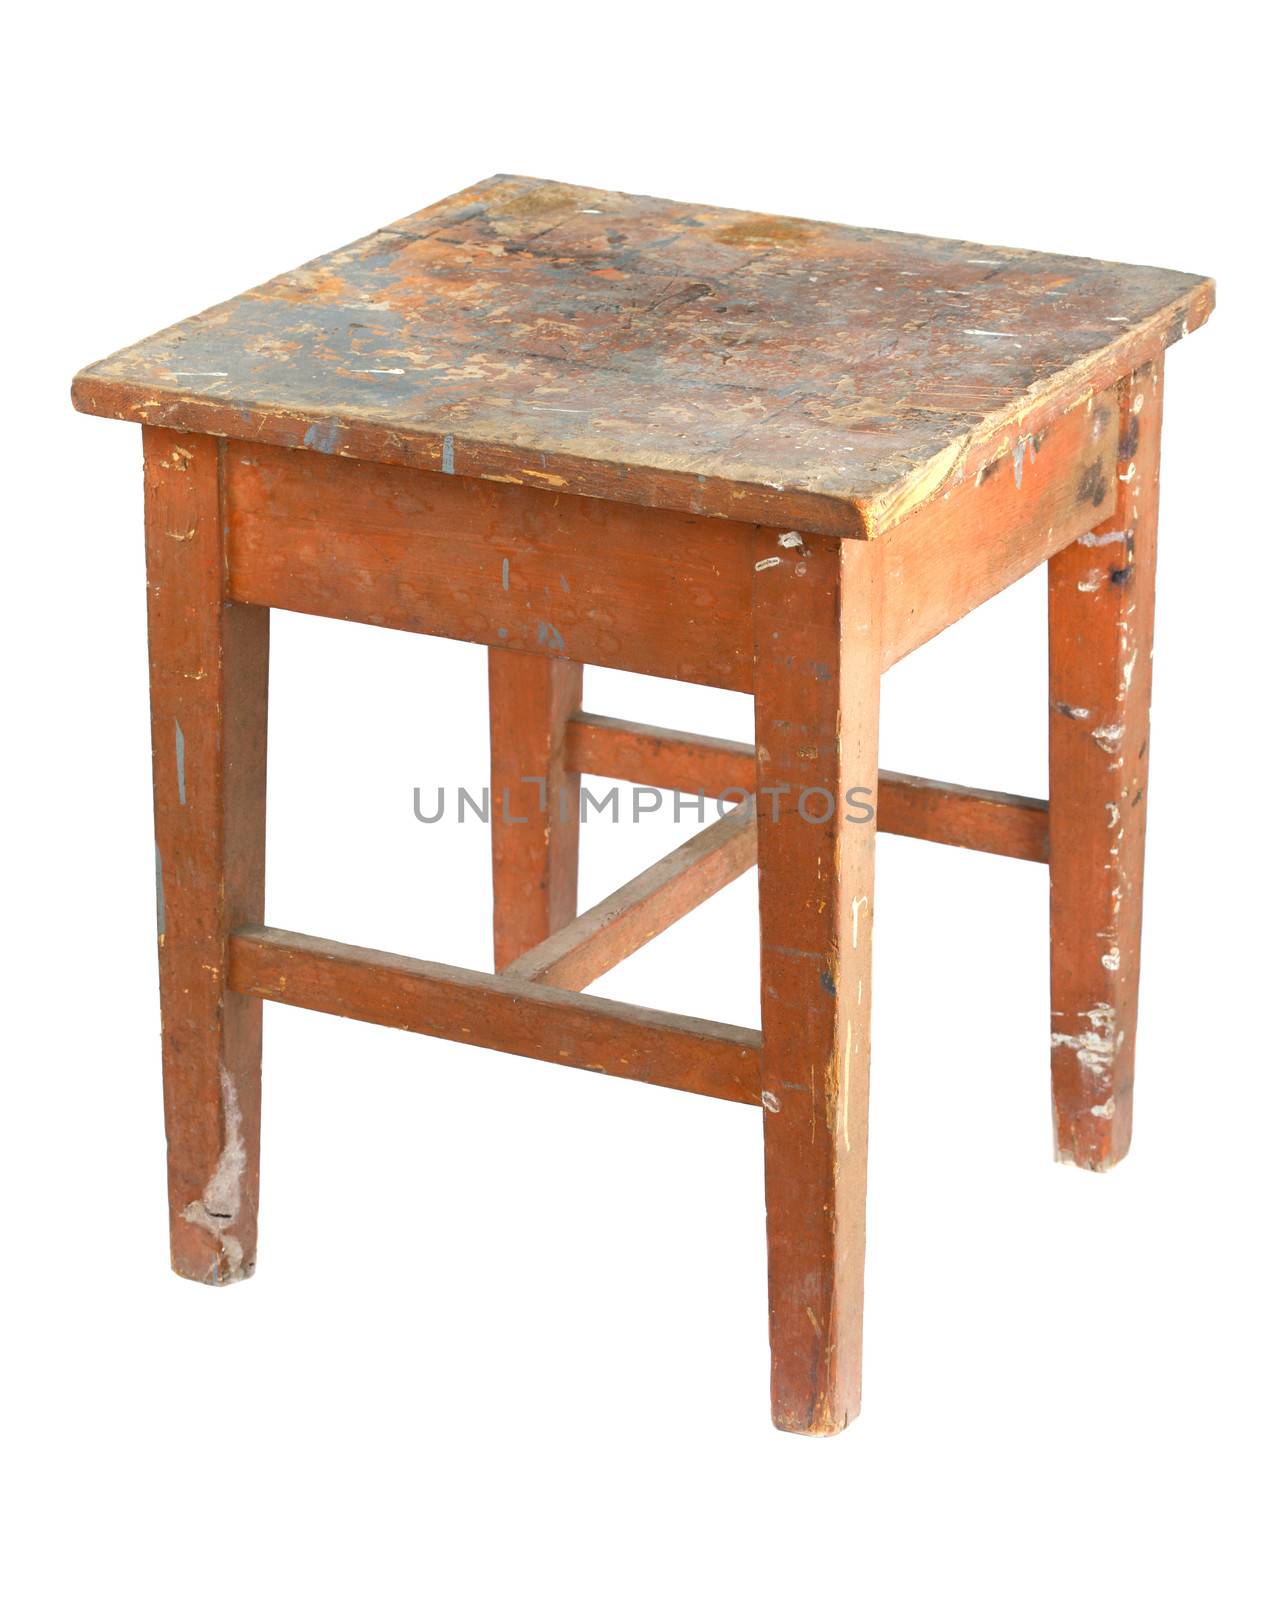 Old, stained, dirty wooden stool